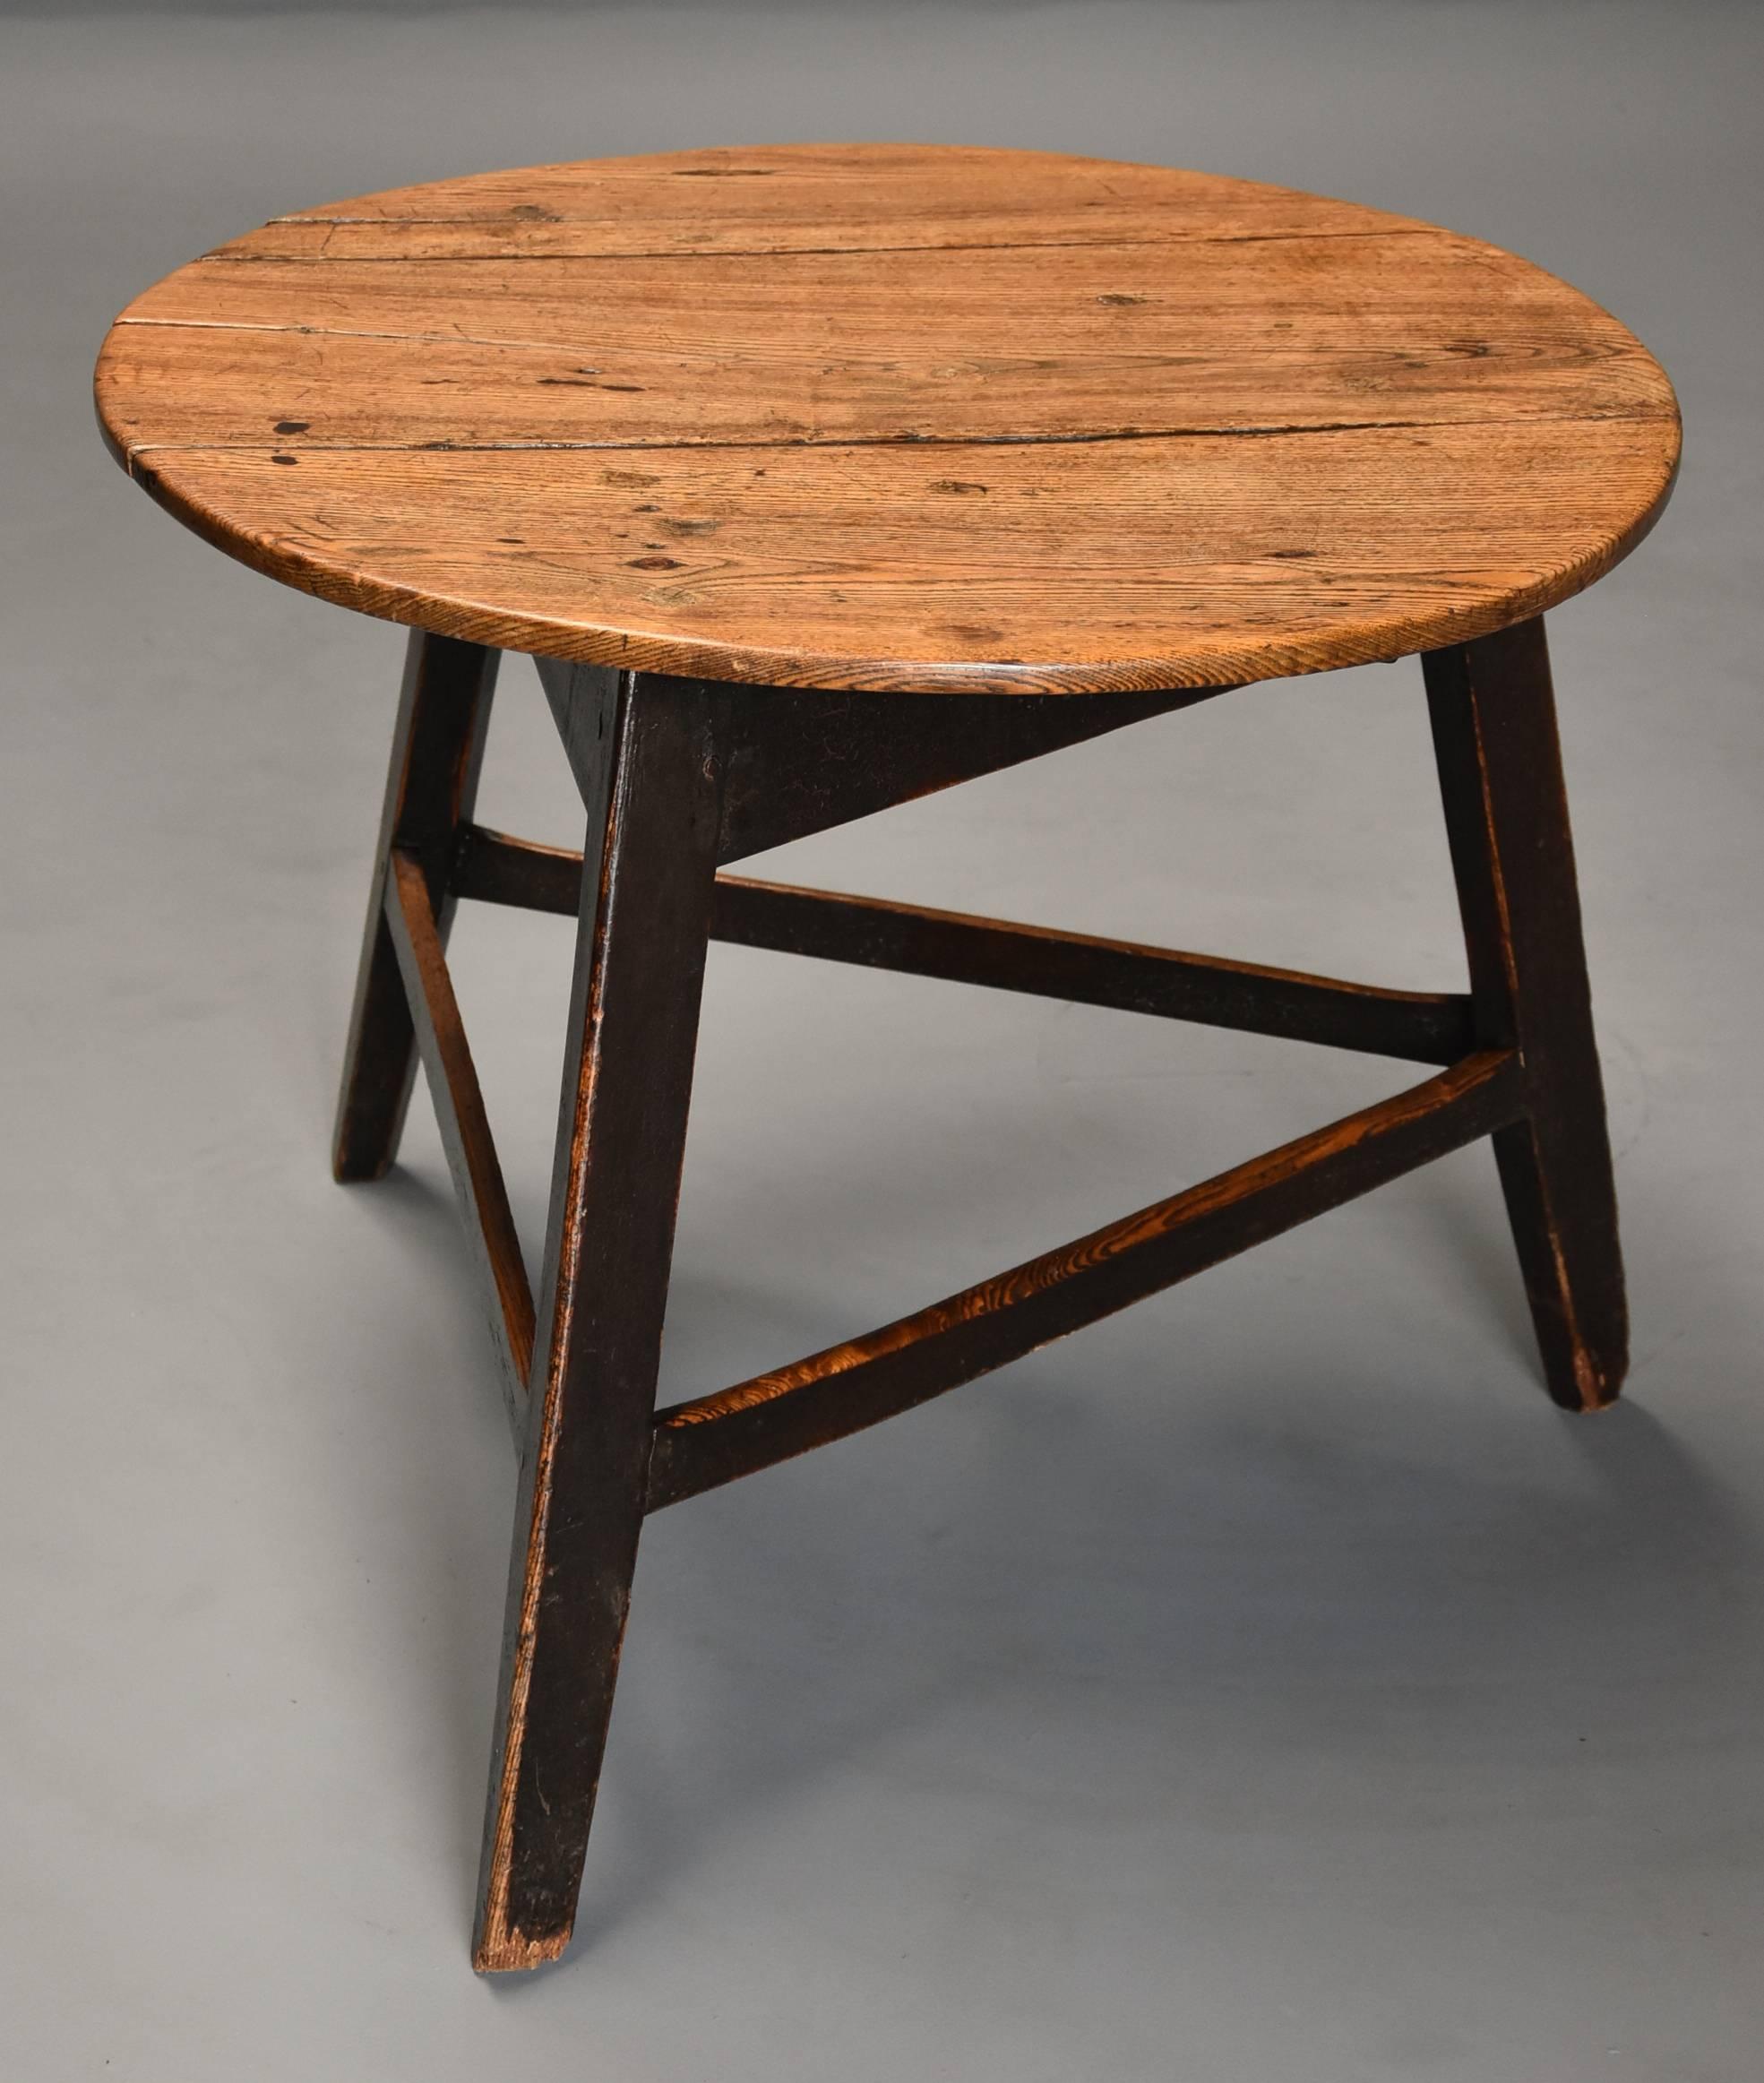 A nice example of a mid-19th century (circa 1840) ash cricket table with original painted base and great patina.

This table consists of a solid, well figured three plank ash top with good patina (color), below the top the painted ash base